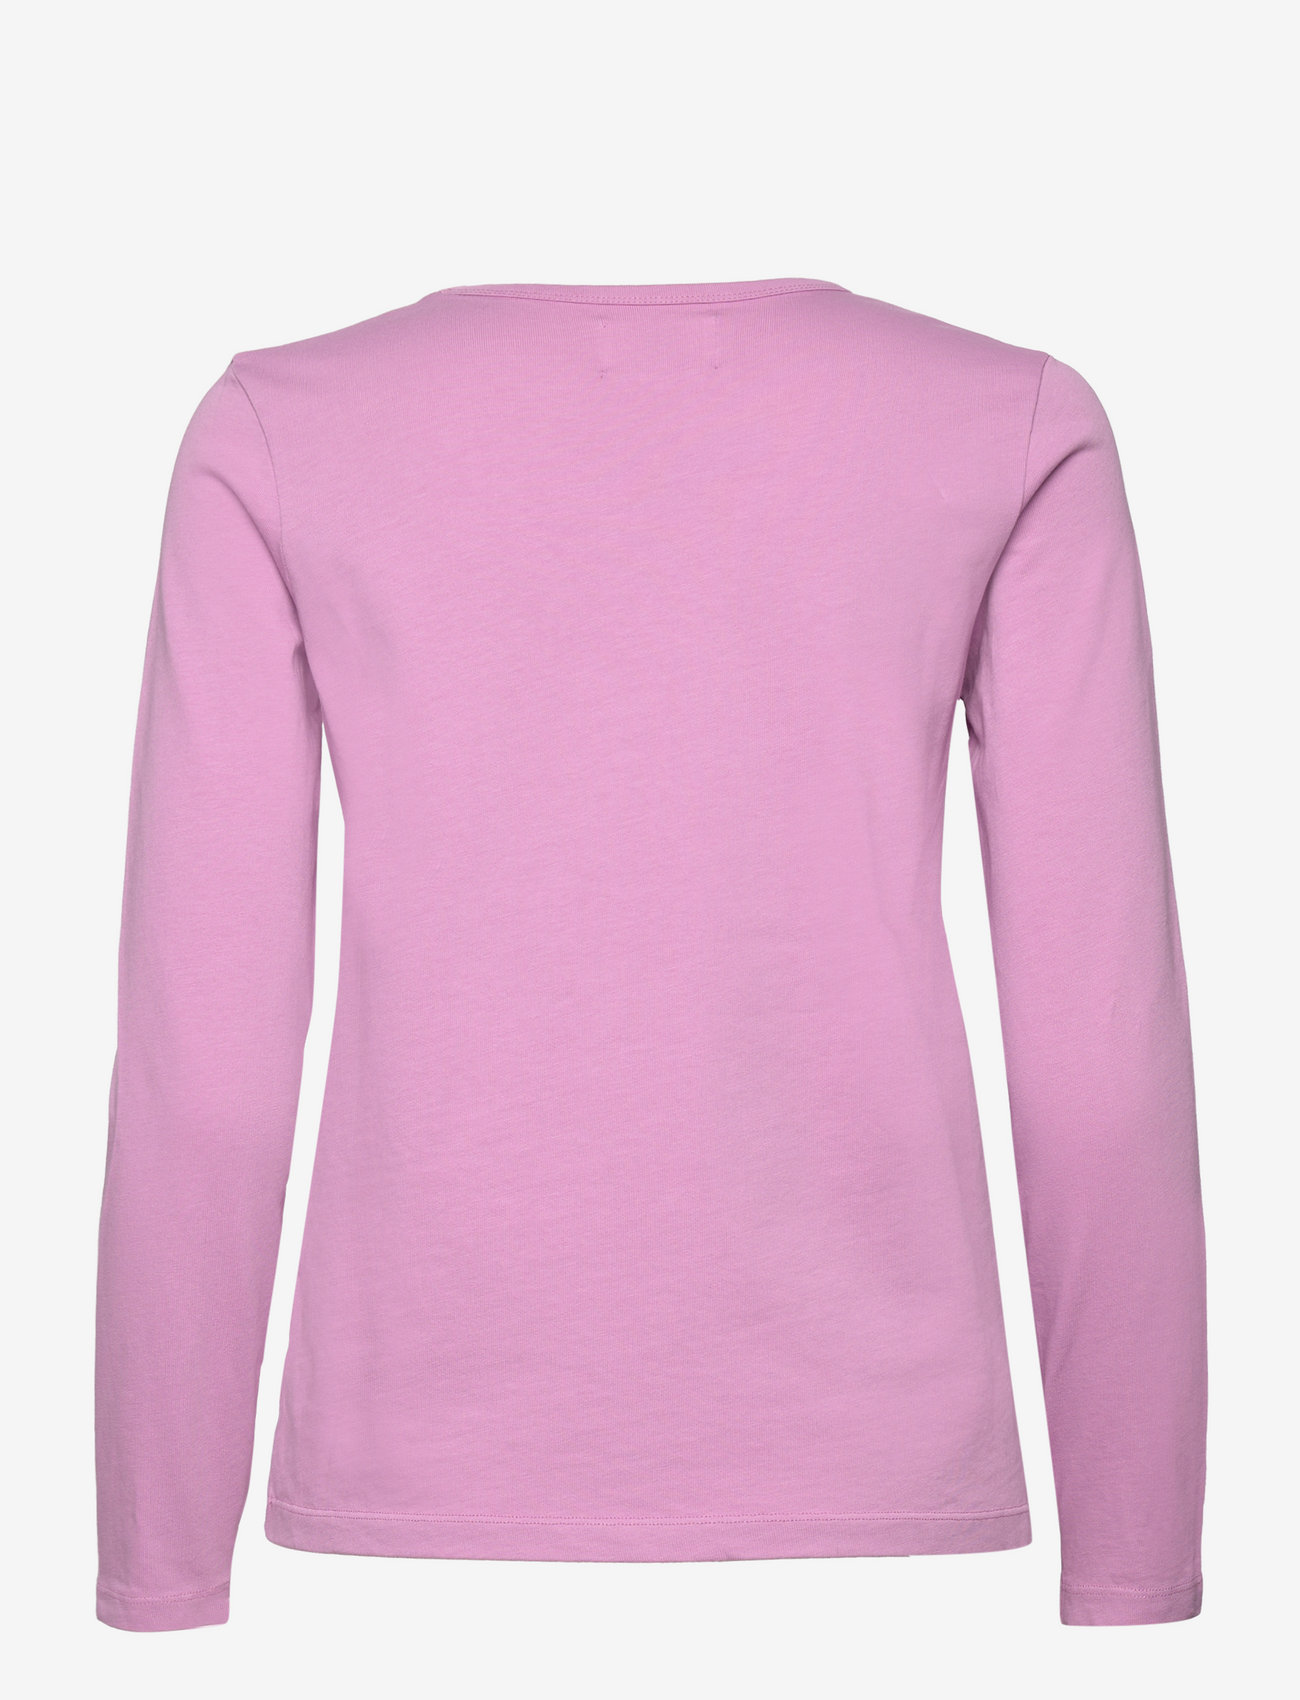 Double A by Wood Wood - Moa stacked logo long sleeve - t-shirt & tops - rosy lavender - 1